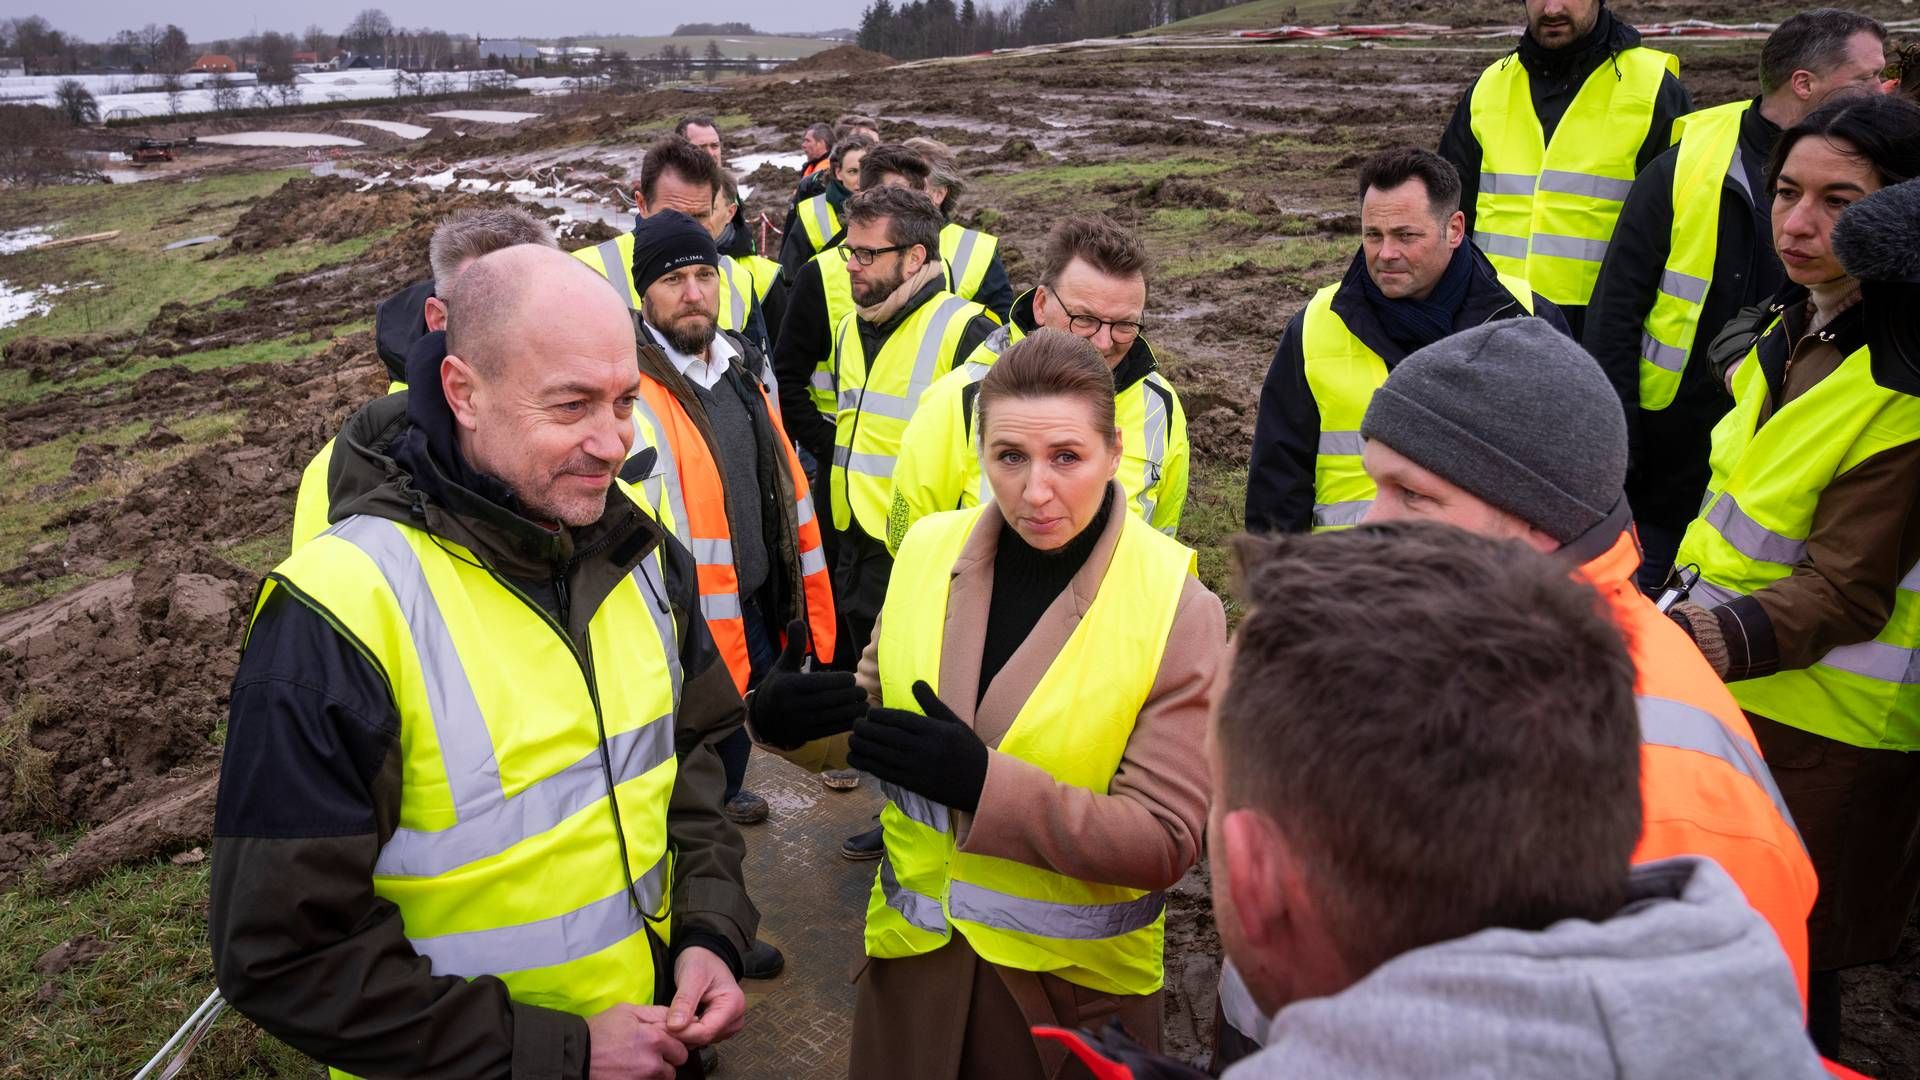 "This is an extraordinary event. It has never happened before in Denmark," said prime minister Mette Frederiksen as she surveyed the area with a huge landslide threatening the aquatic environment and a Danish provincial town.